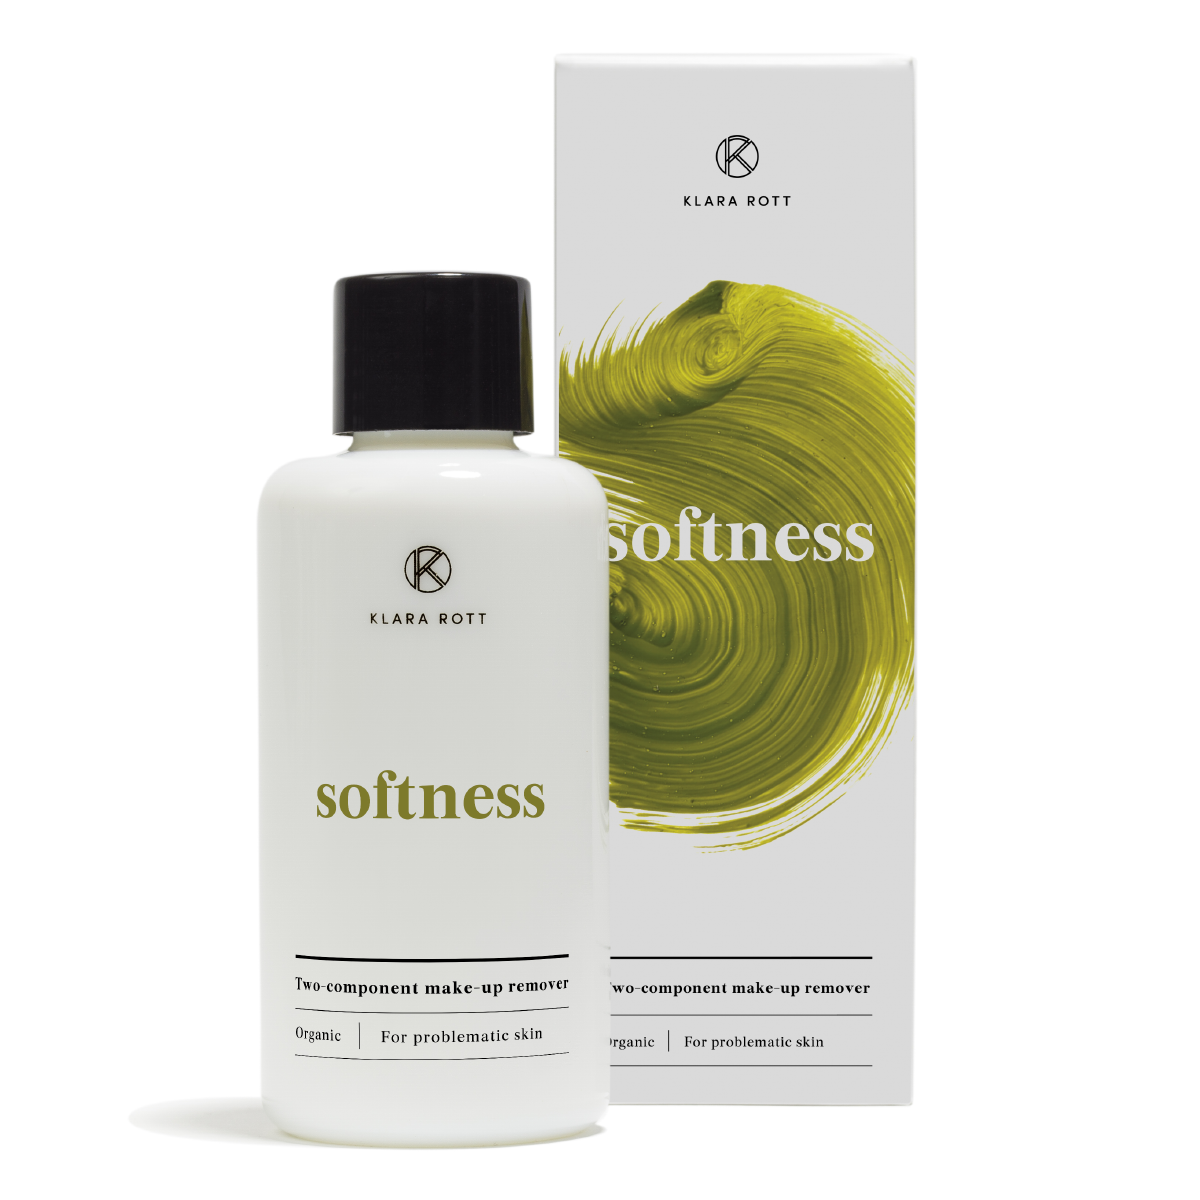 Softness - A two-component makeup remover for problematic skin 